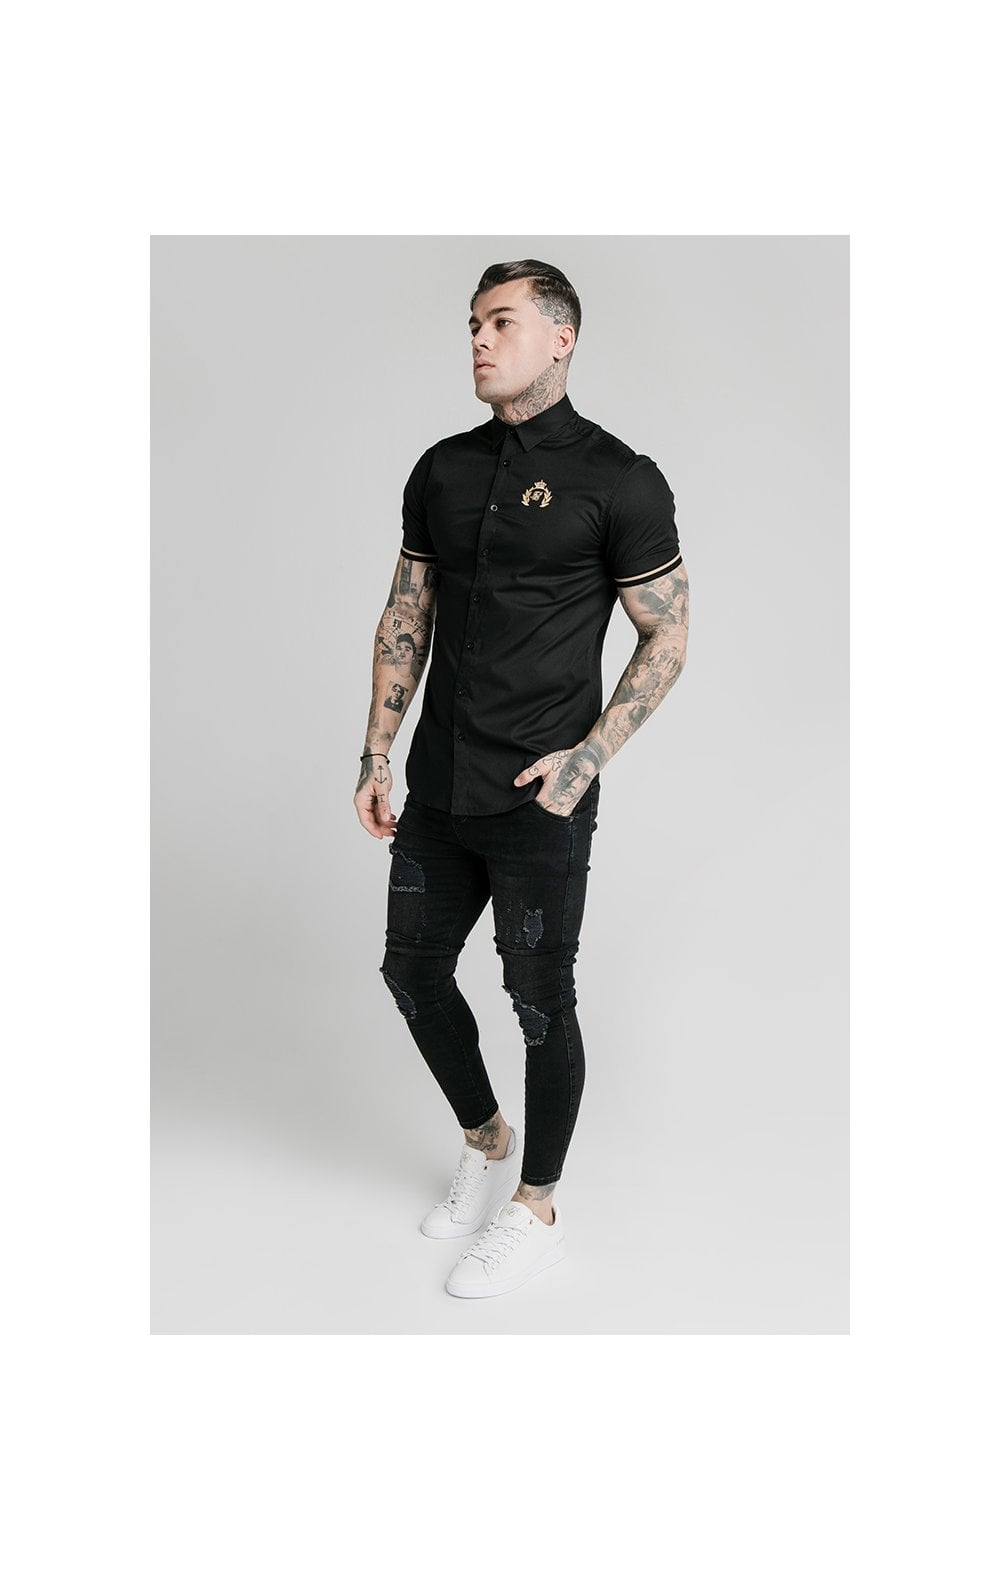 Load image into Gallery viewer, SikSilk S/S Prestige Inset Cuff Shirt - Black (2)